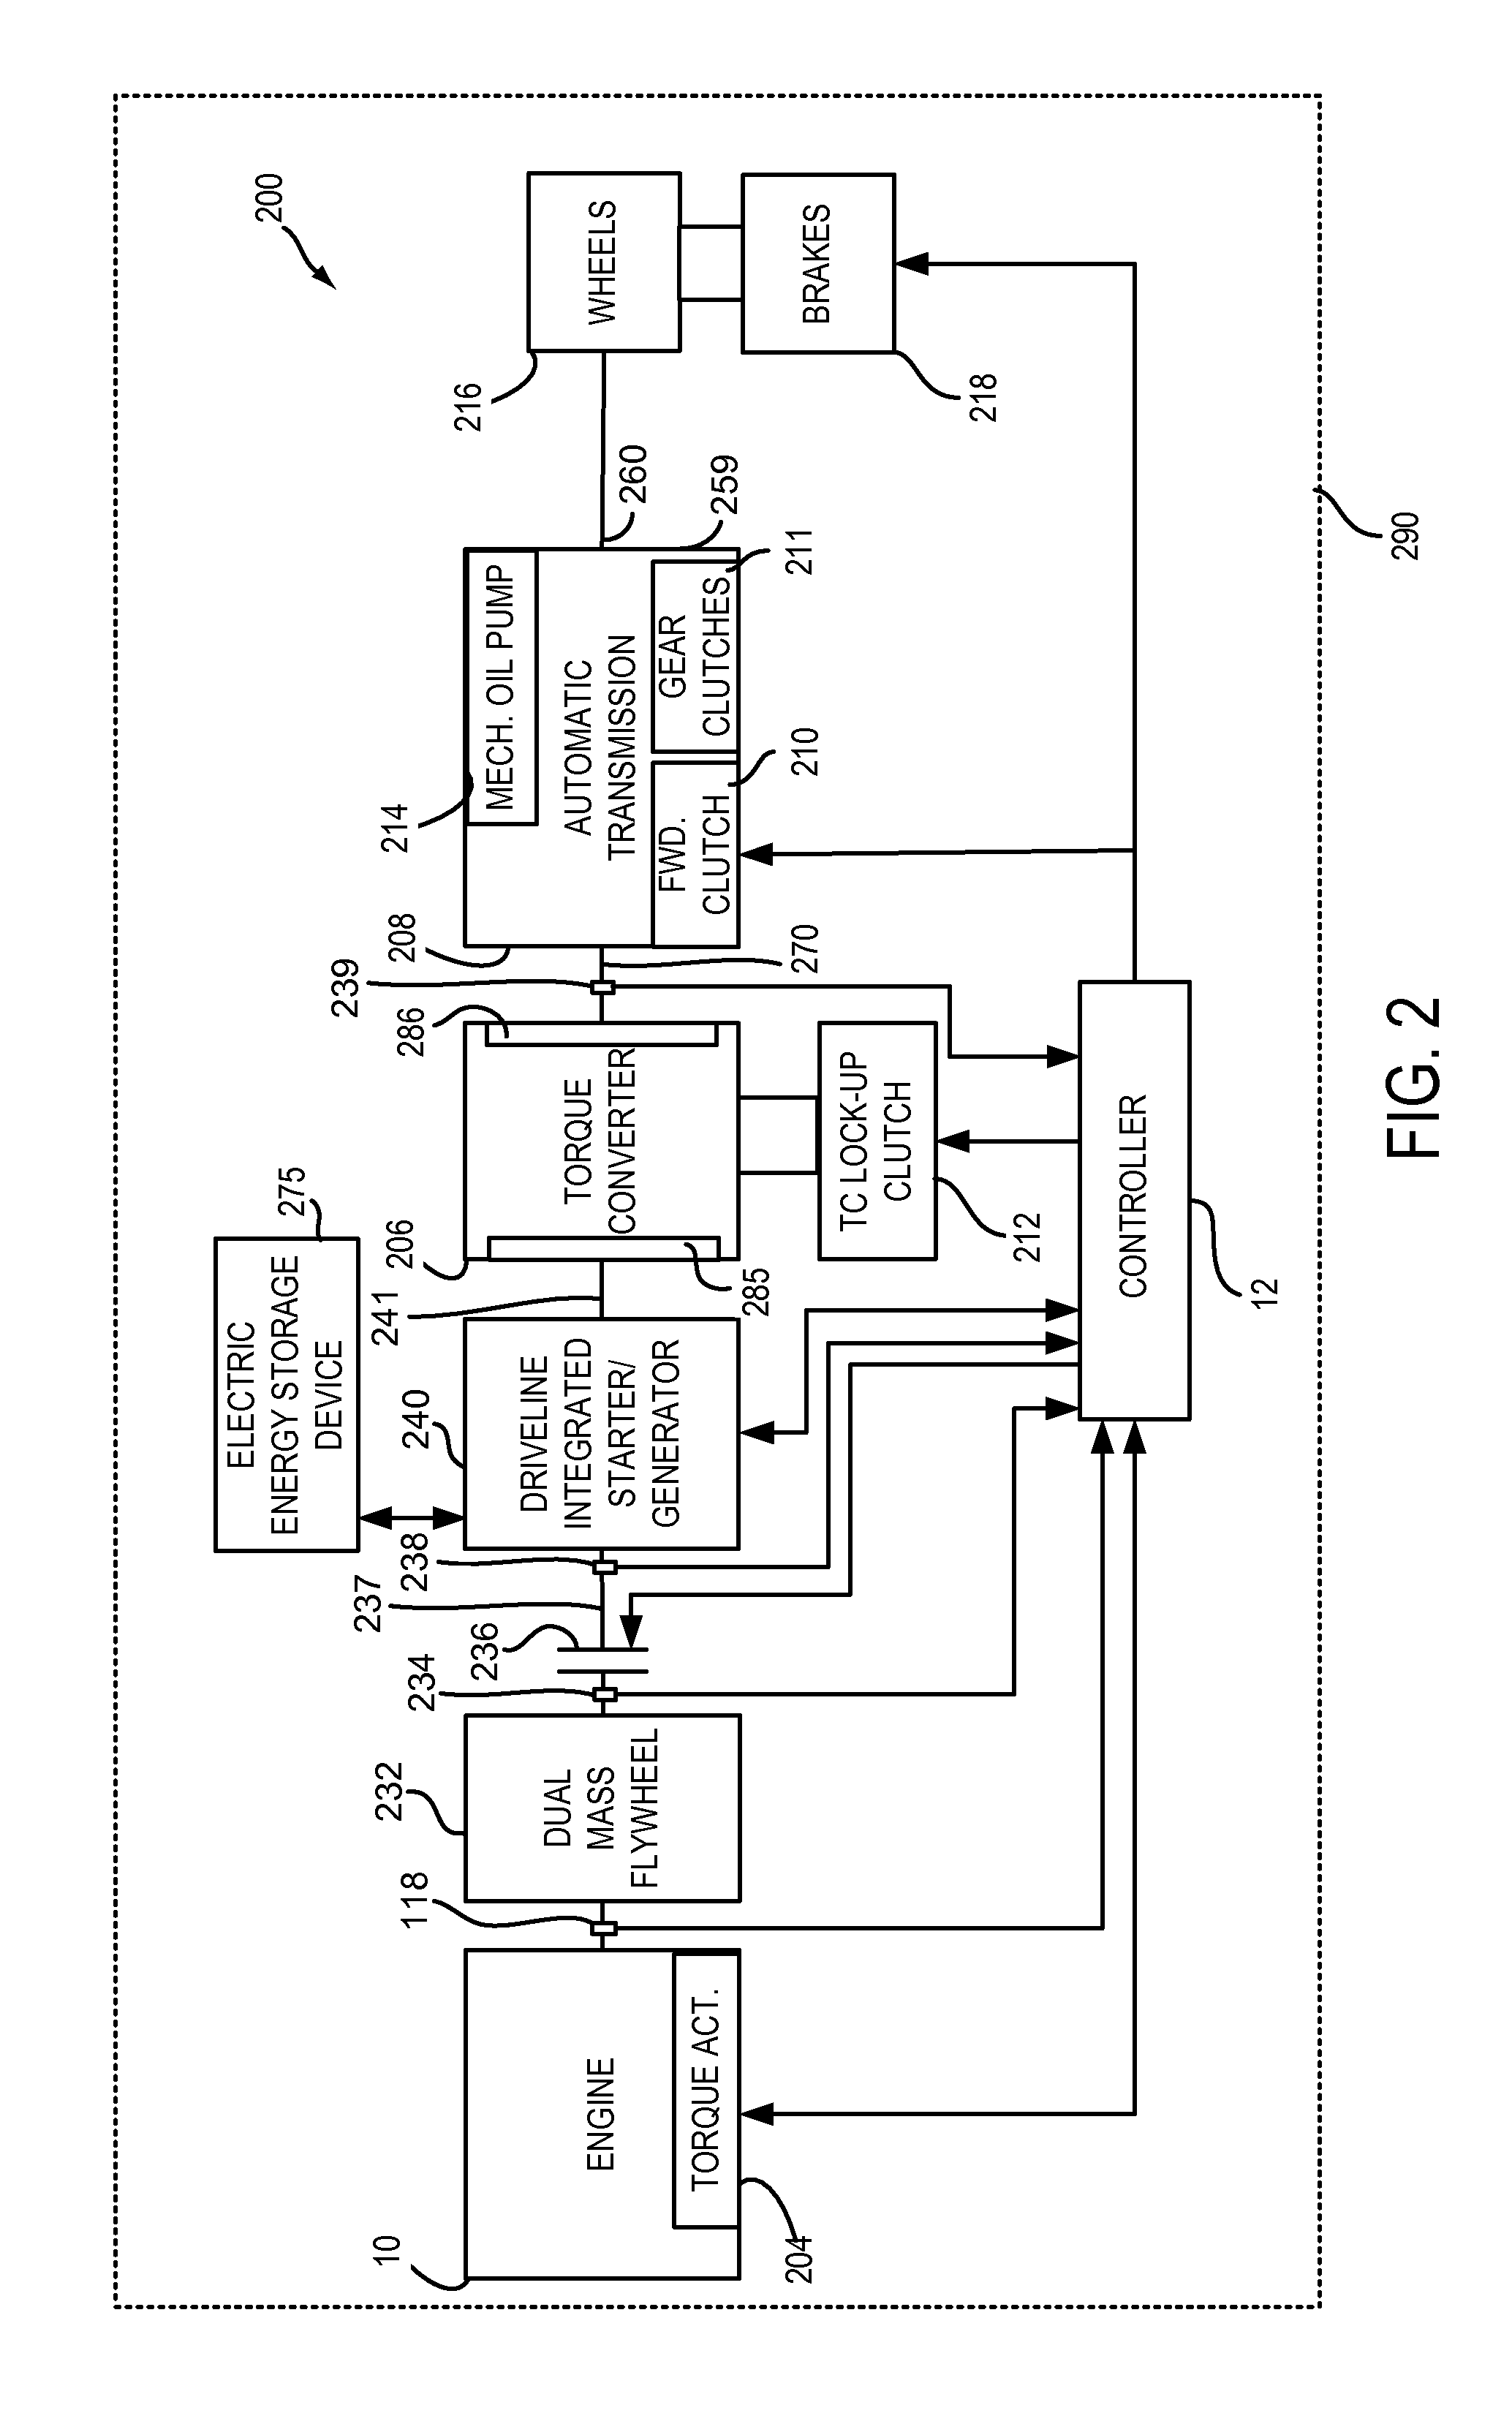 Methods and systems for operating an engine